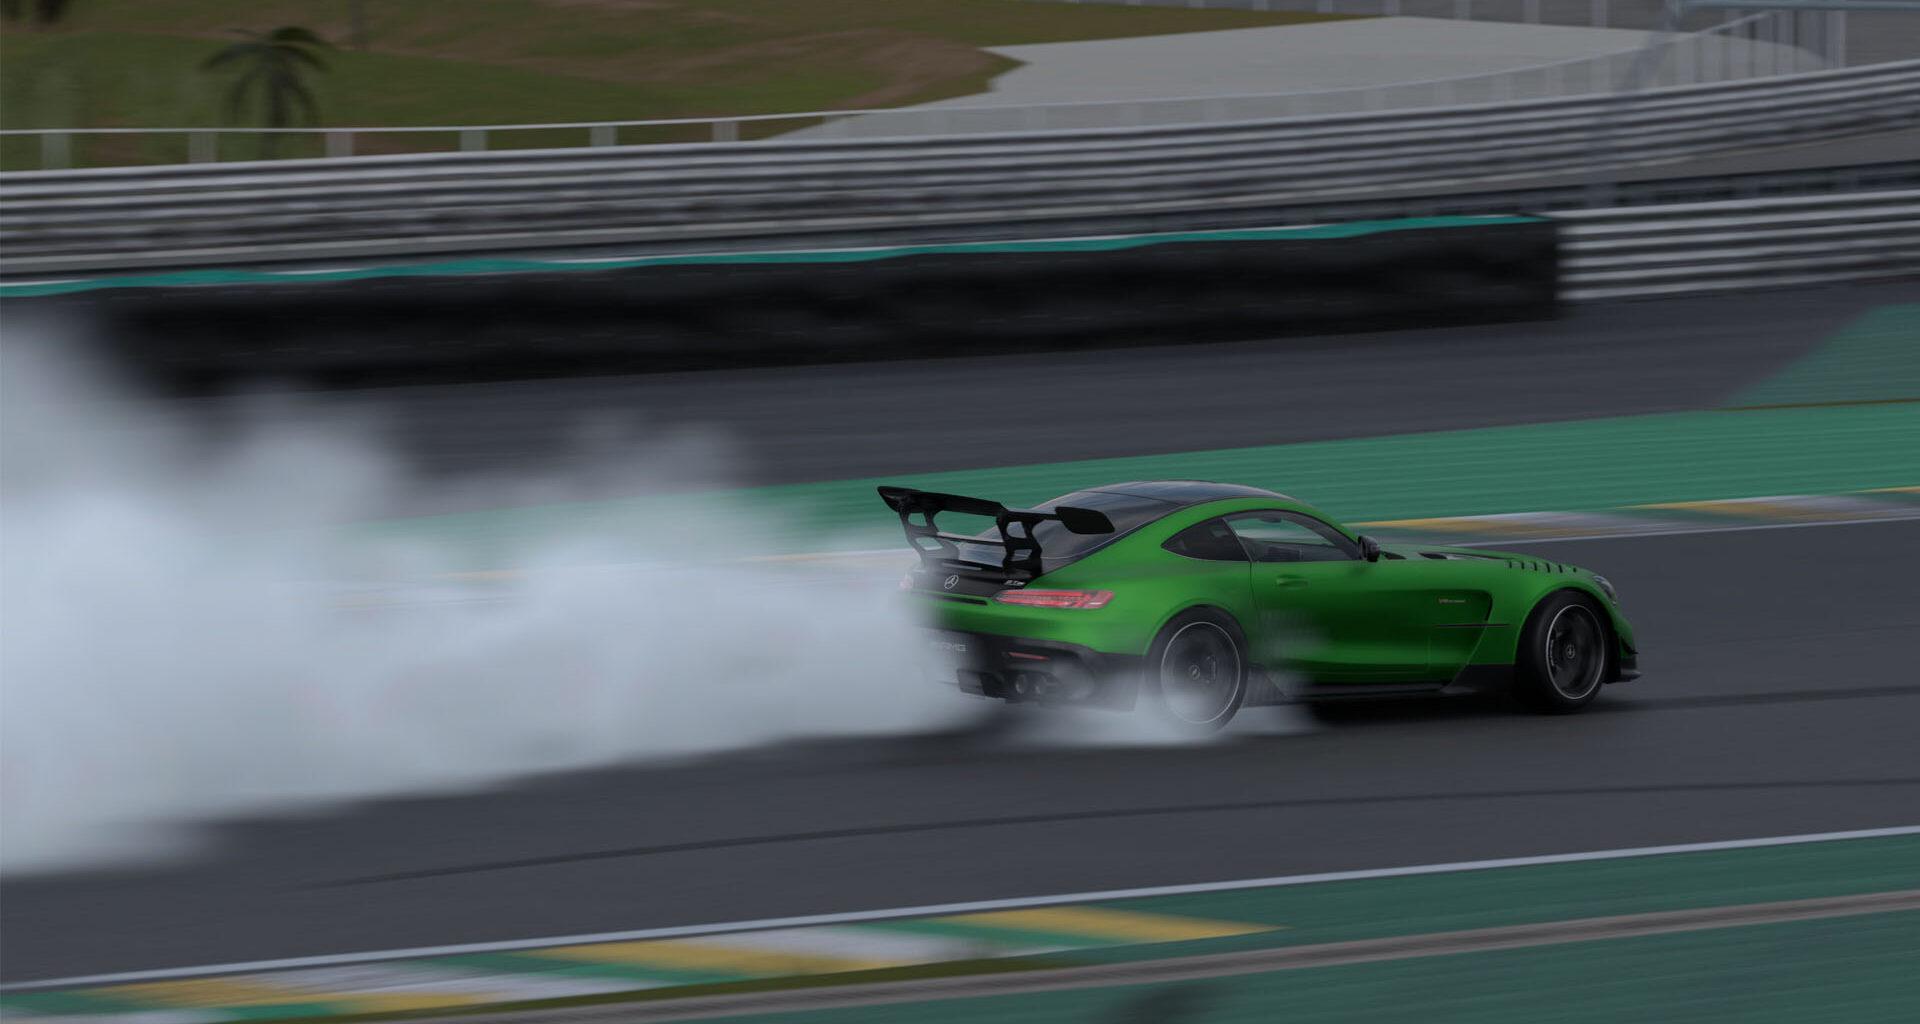 Gran Turismo 7's latest Lap Time Challenge pairs an AMG with Interlagos